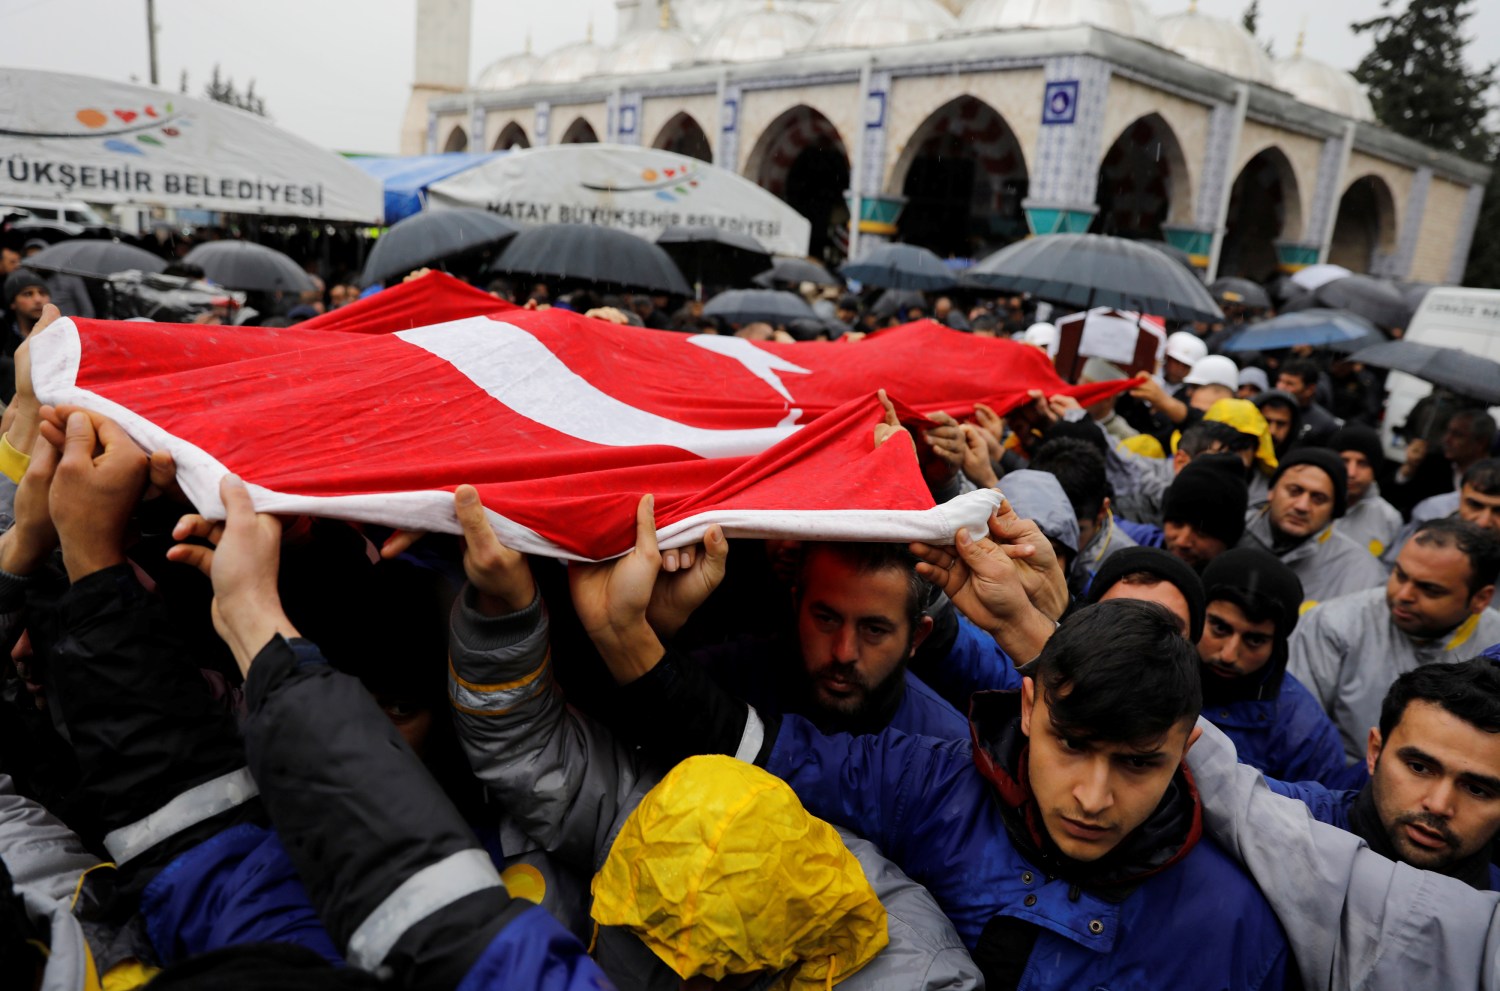 Relatives and friends of Sahin Elitas, a civilian who was killed in a rocket attack fired by Syria, carry a Turkish flag during his funeral ceremony in the town of Kirikhan in Hatay province, Turkey January 23, 2018.